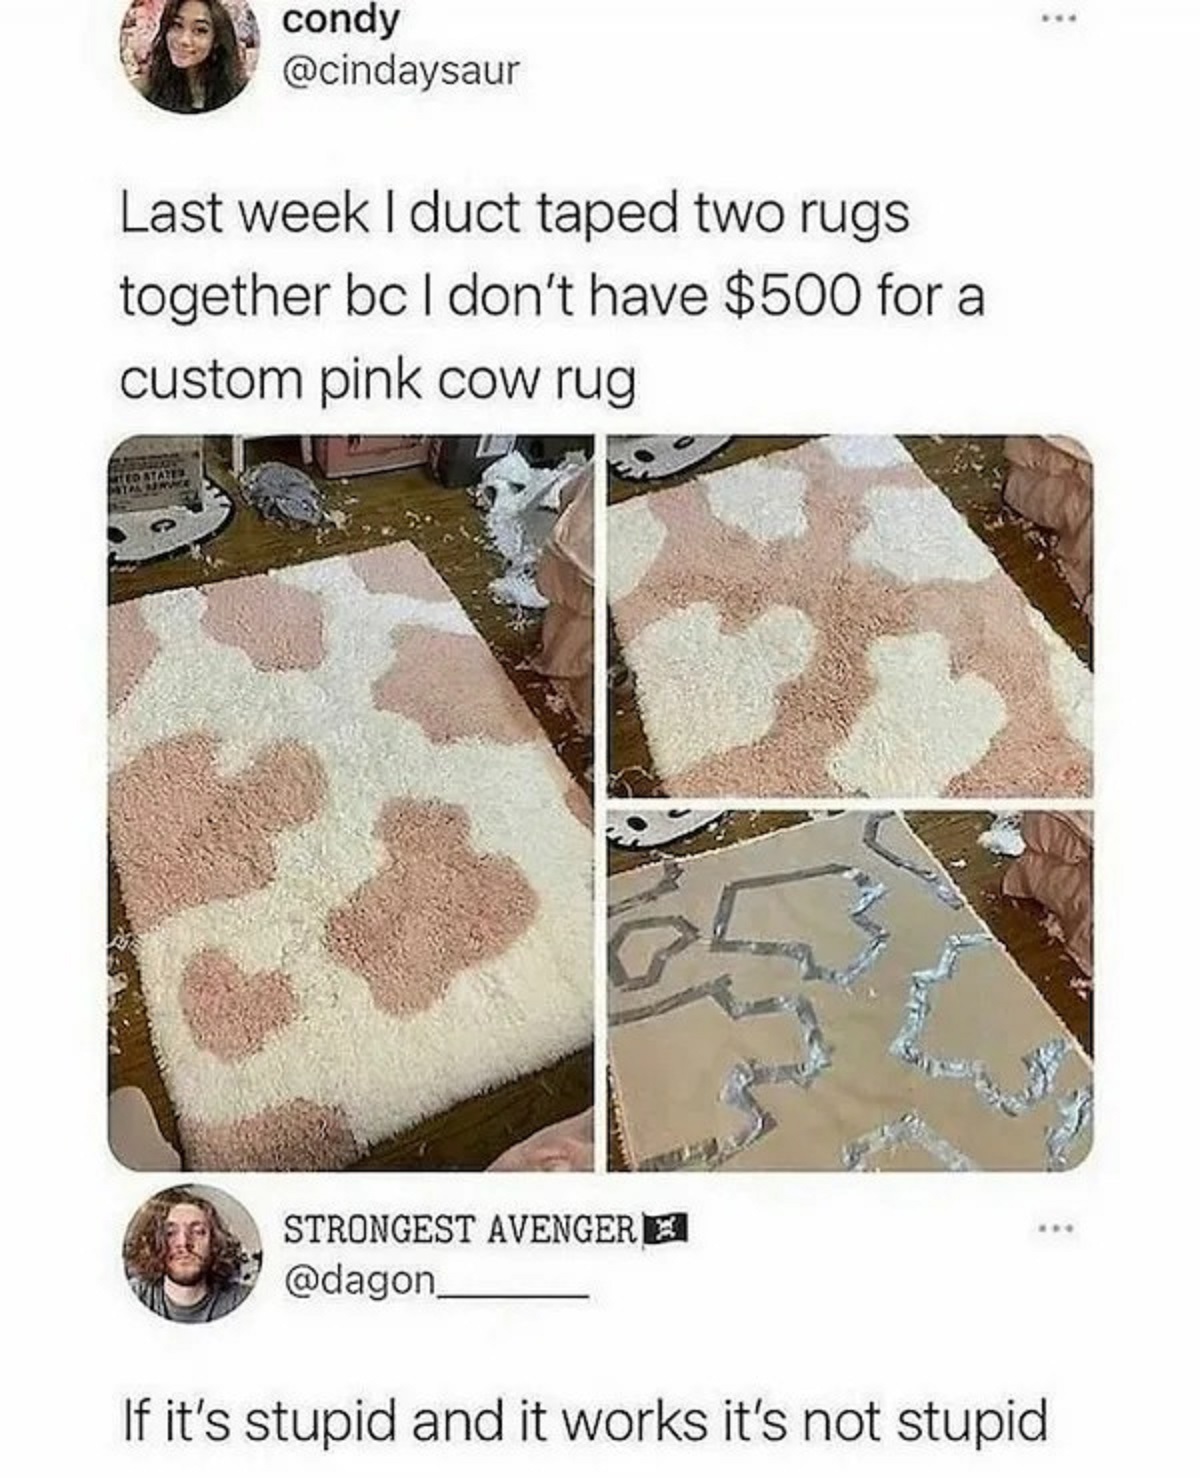 duct taping two rugs together - condy Last week I duct taped two rugs together bc I don't have $500 for a custom pink cow rug Strongest Avenger If it's stupid and it works it's not stupid